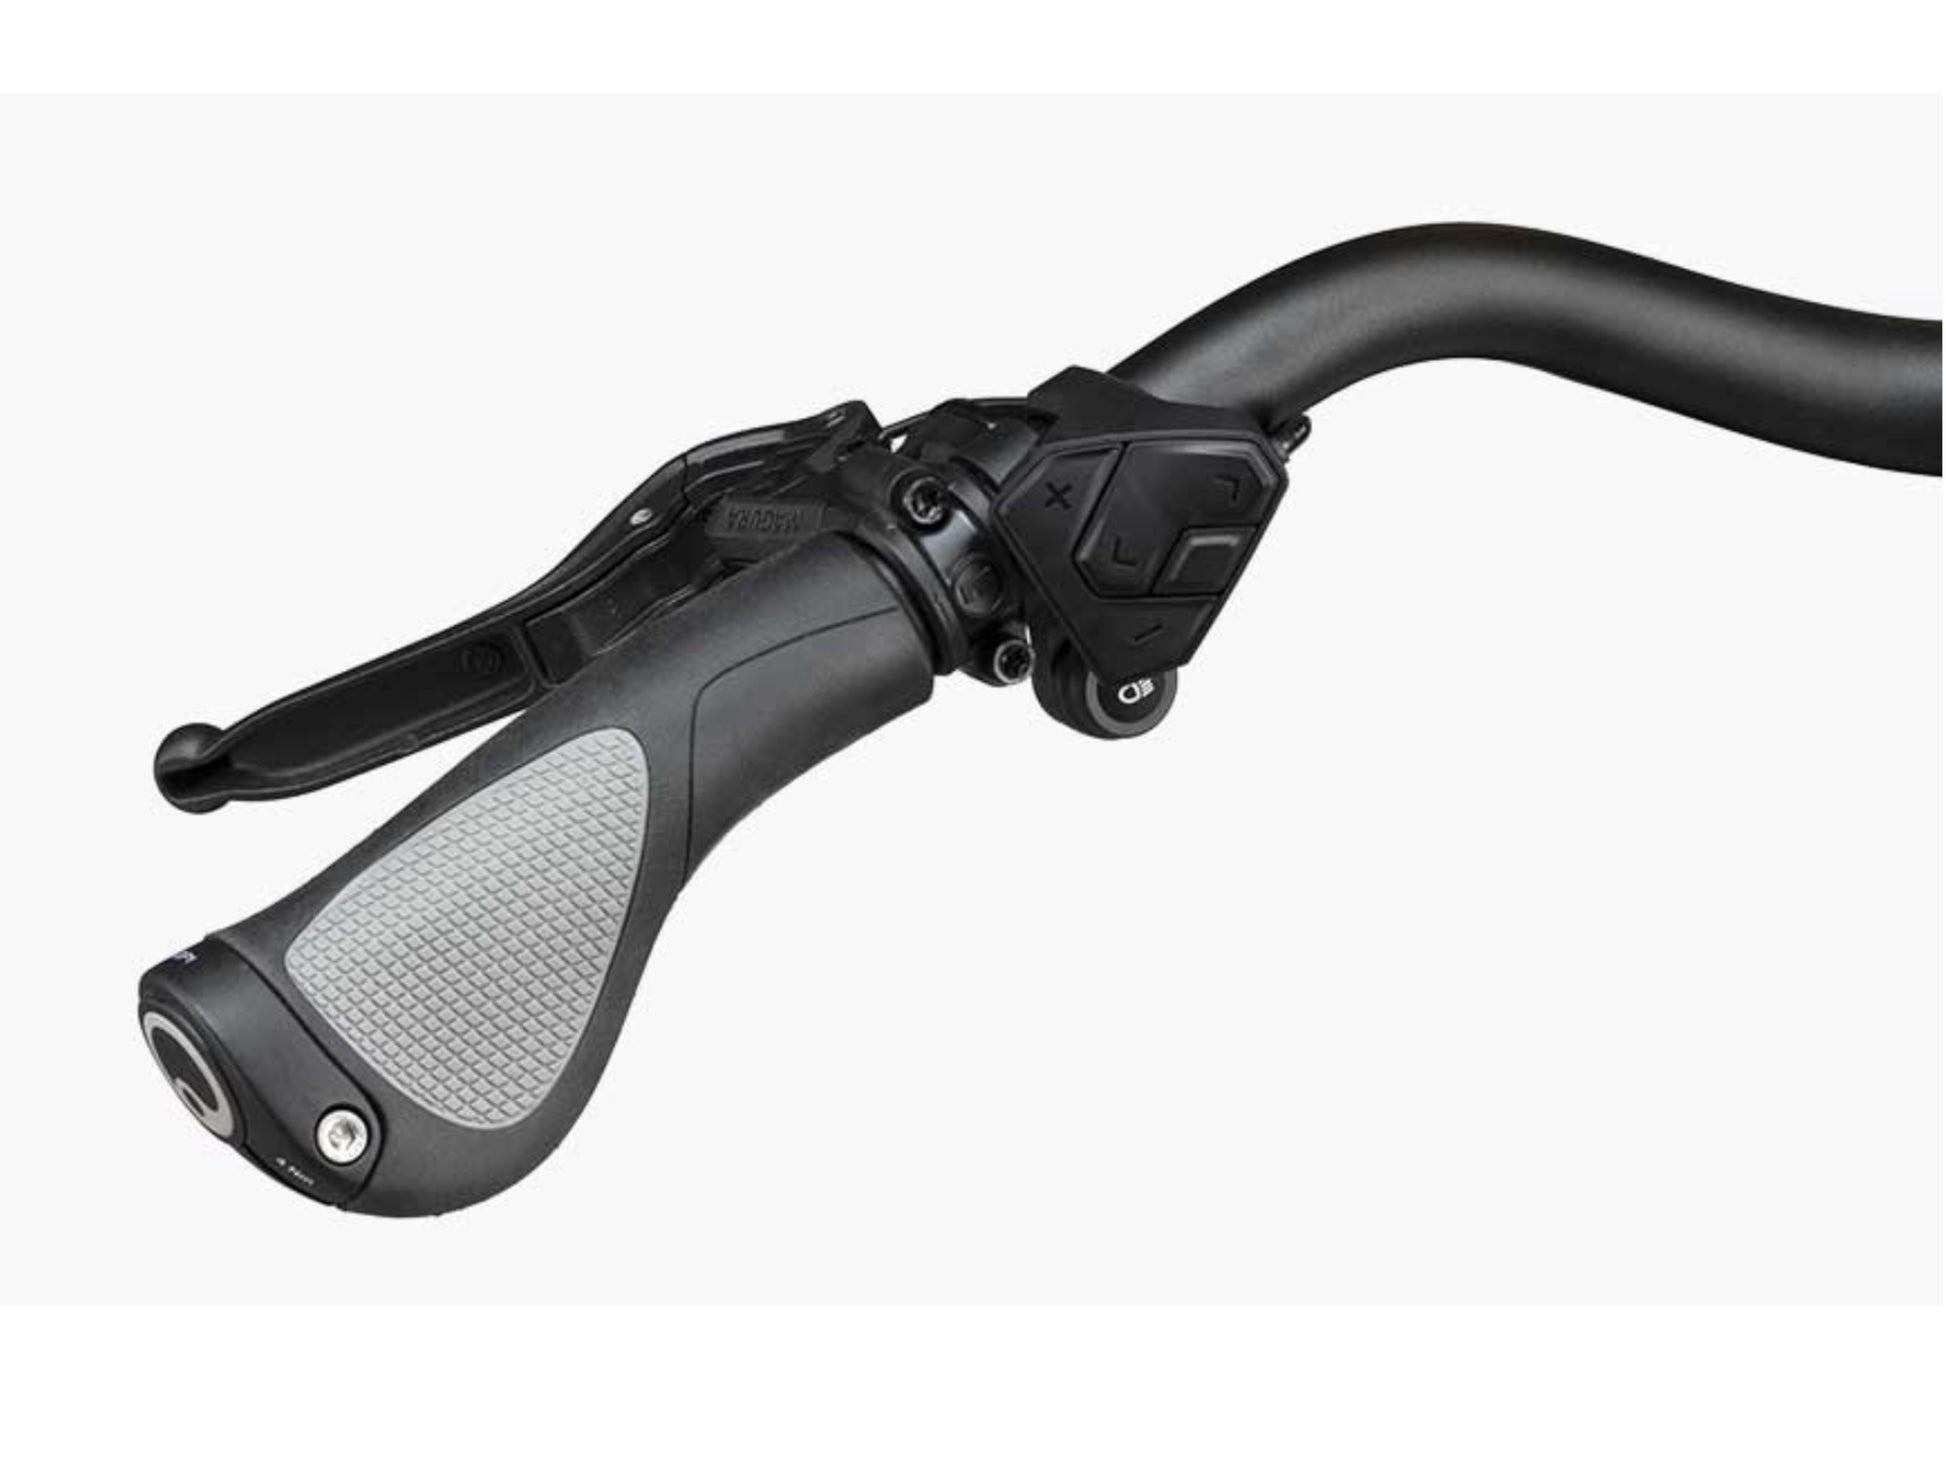 Riese and Muller Nevo GT Touring emtb hardtail close up comfort kit option